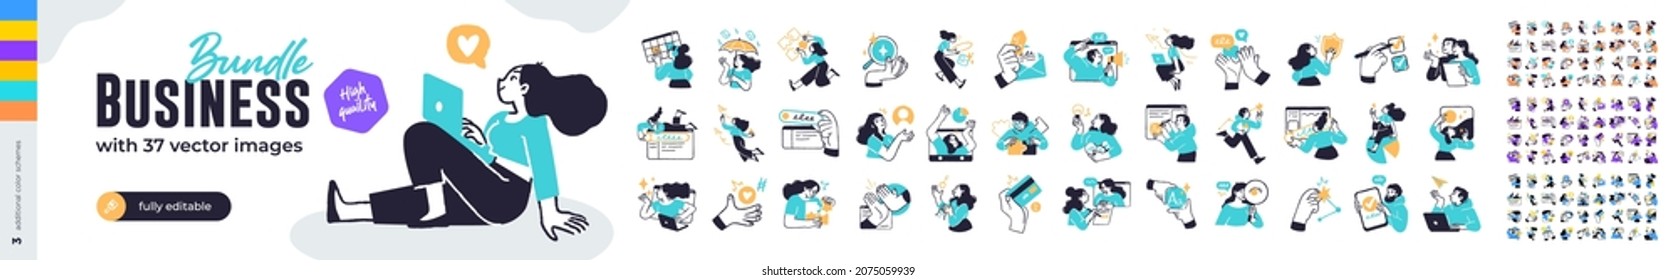 Business Concept illustrations. Mega set. Collection of scenes with men and women taking part in business activities. Vector illustration - Shutterstock ID 2075059939